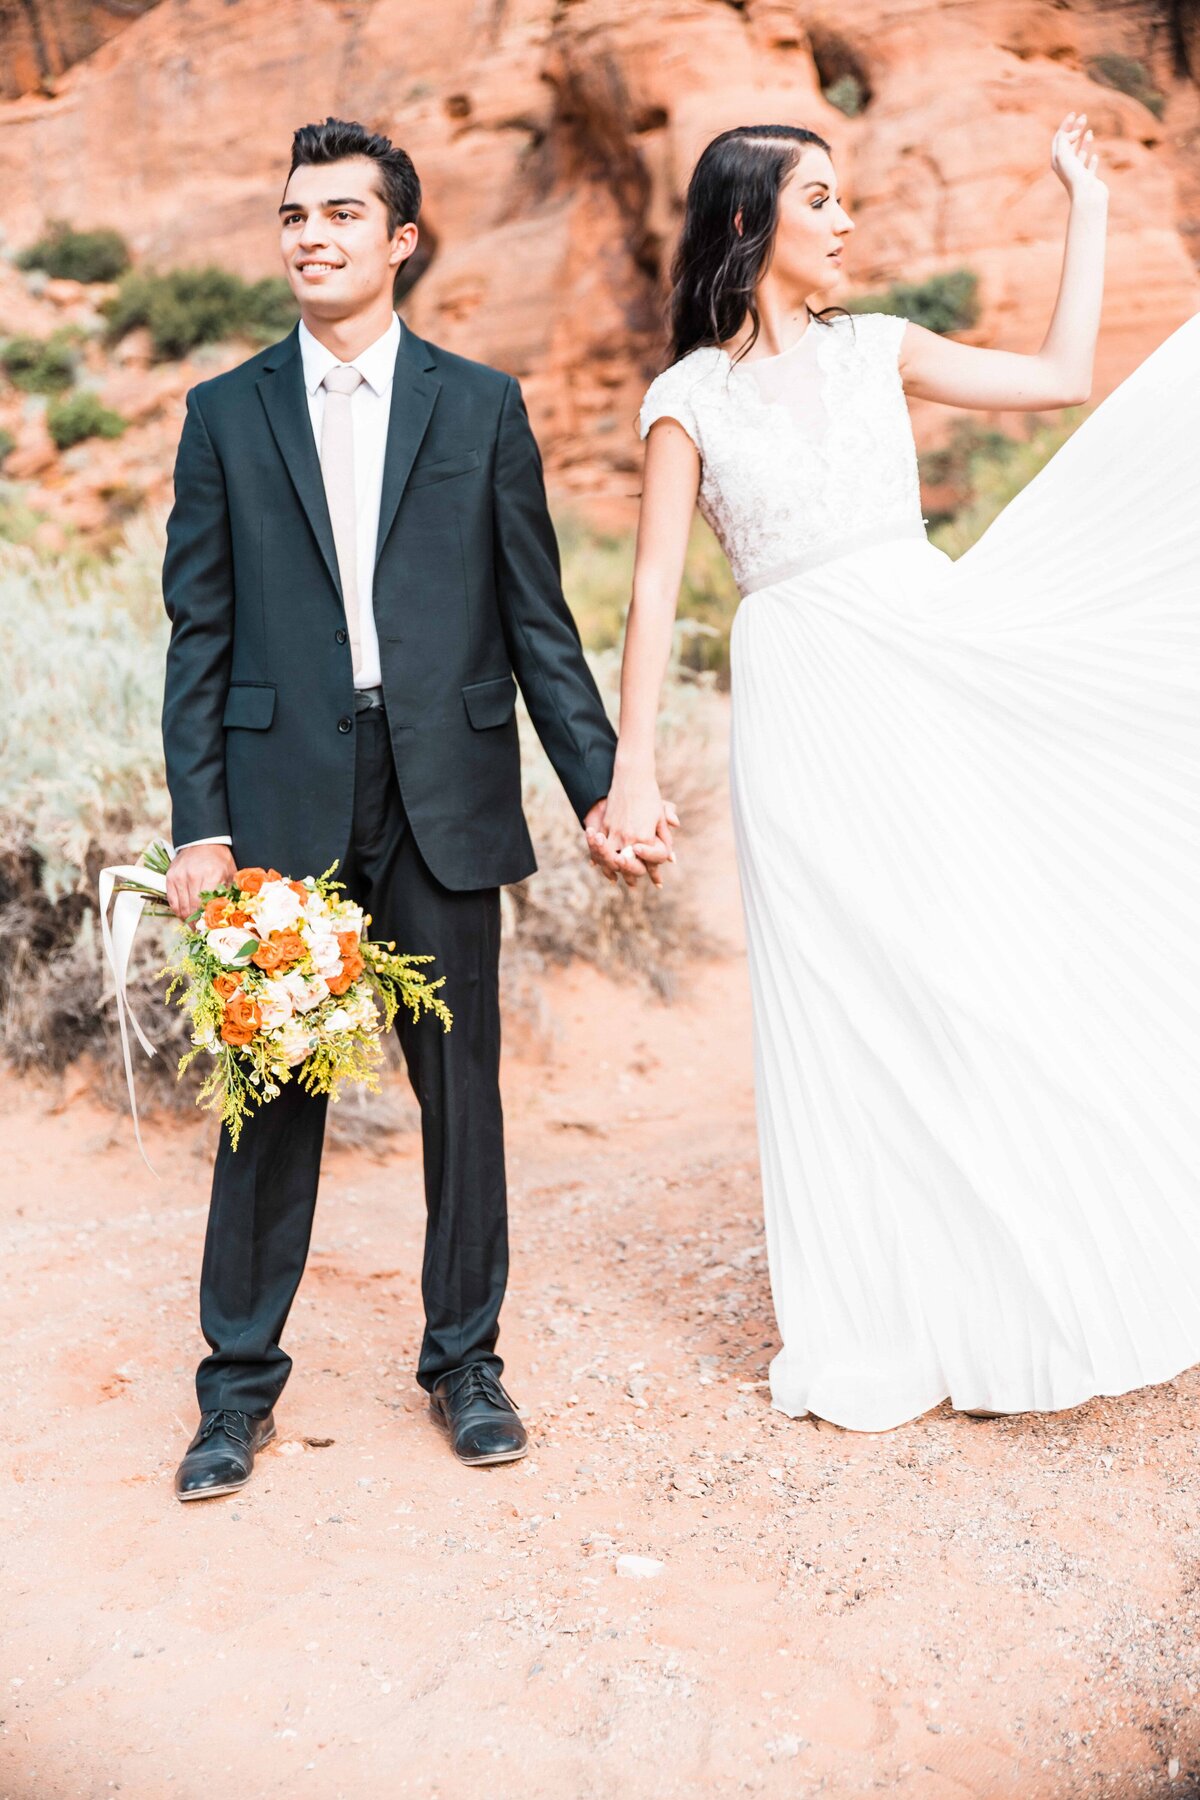 The bride's dress flies as the bride and groom pose for photos at this southern Utah elopement